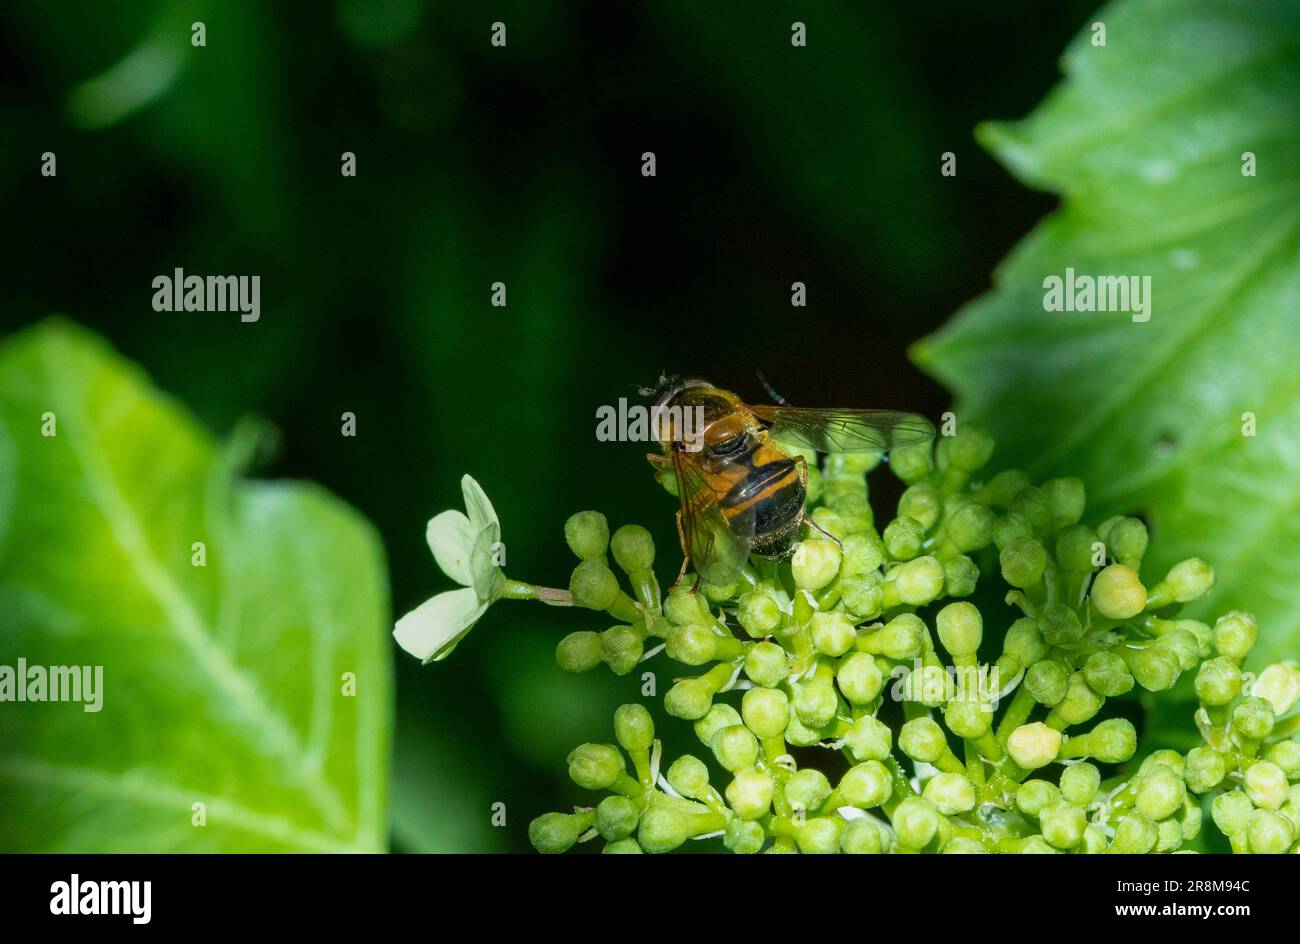 Hoverfly perched on flower head Stock Photo